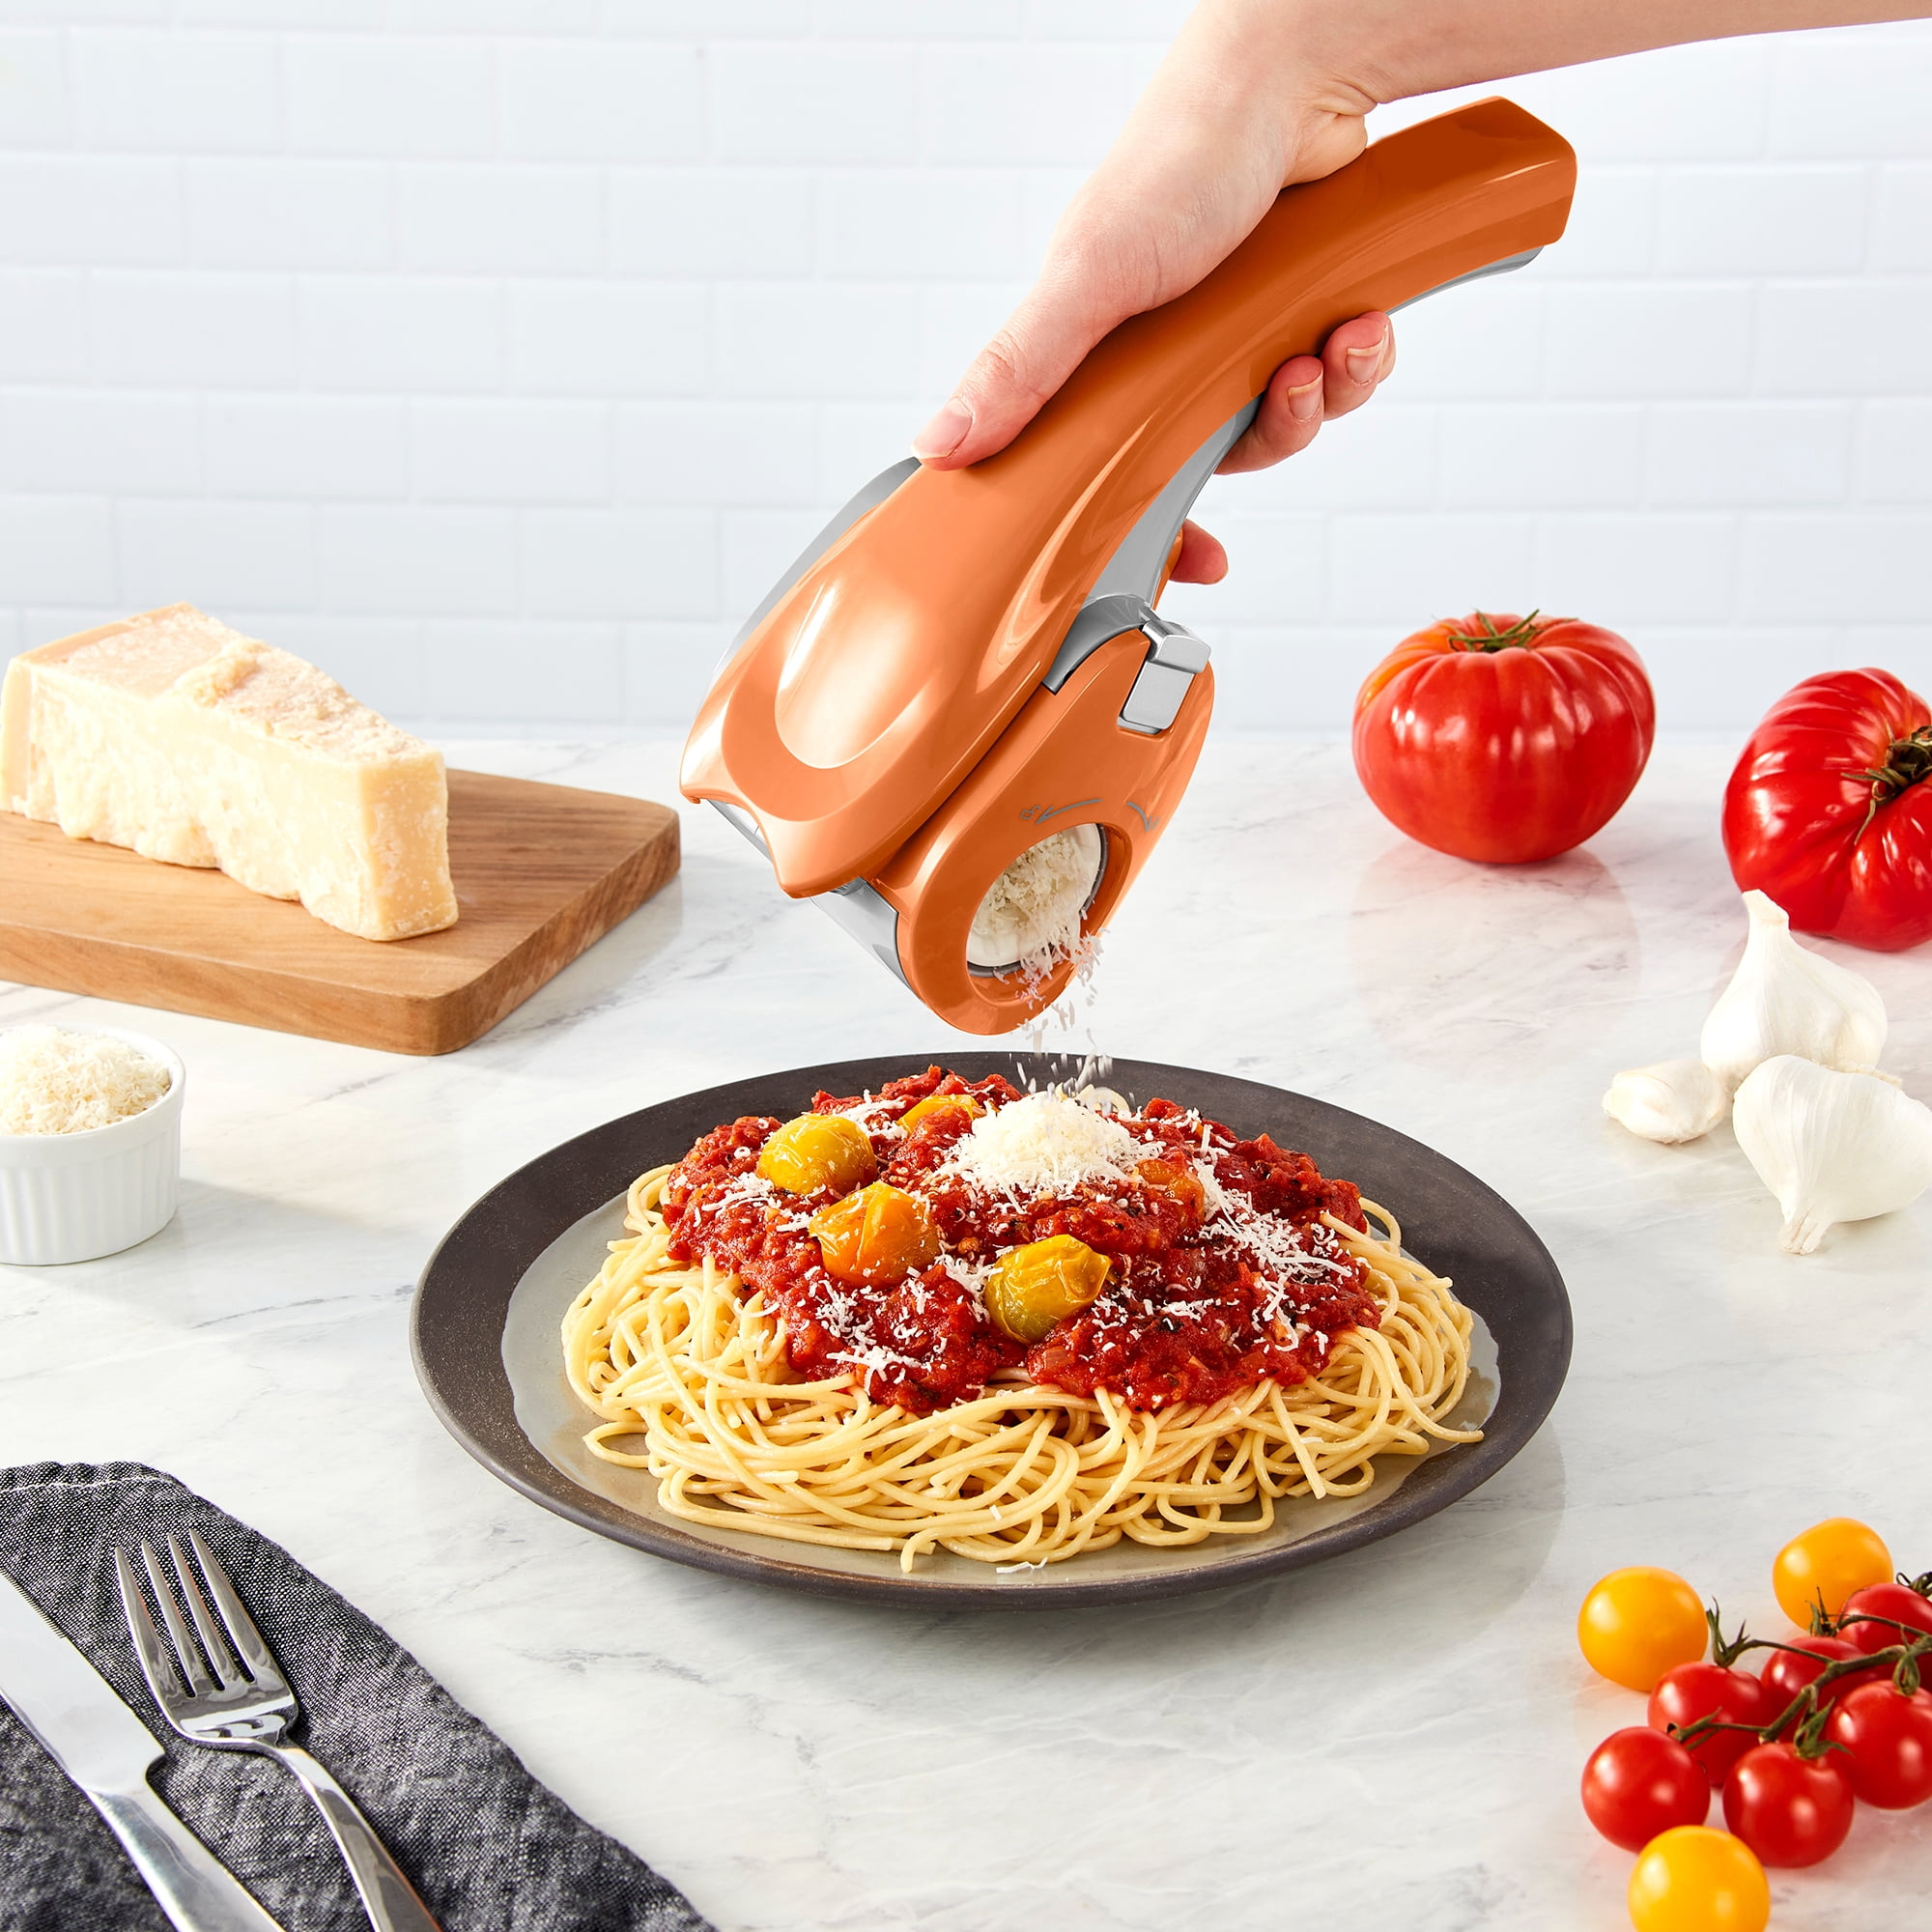 Electric Cheese Grater for Hard Cheeses (Not Cheddar!) - Just Amazing Deals Automatic Electric Handheld Rotary Cheese Grater Slicer for Parmesan